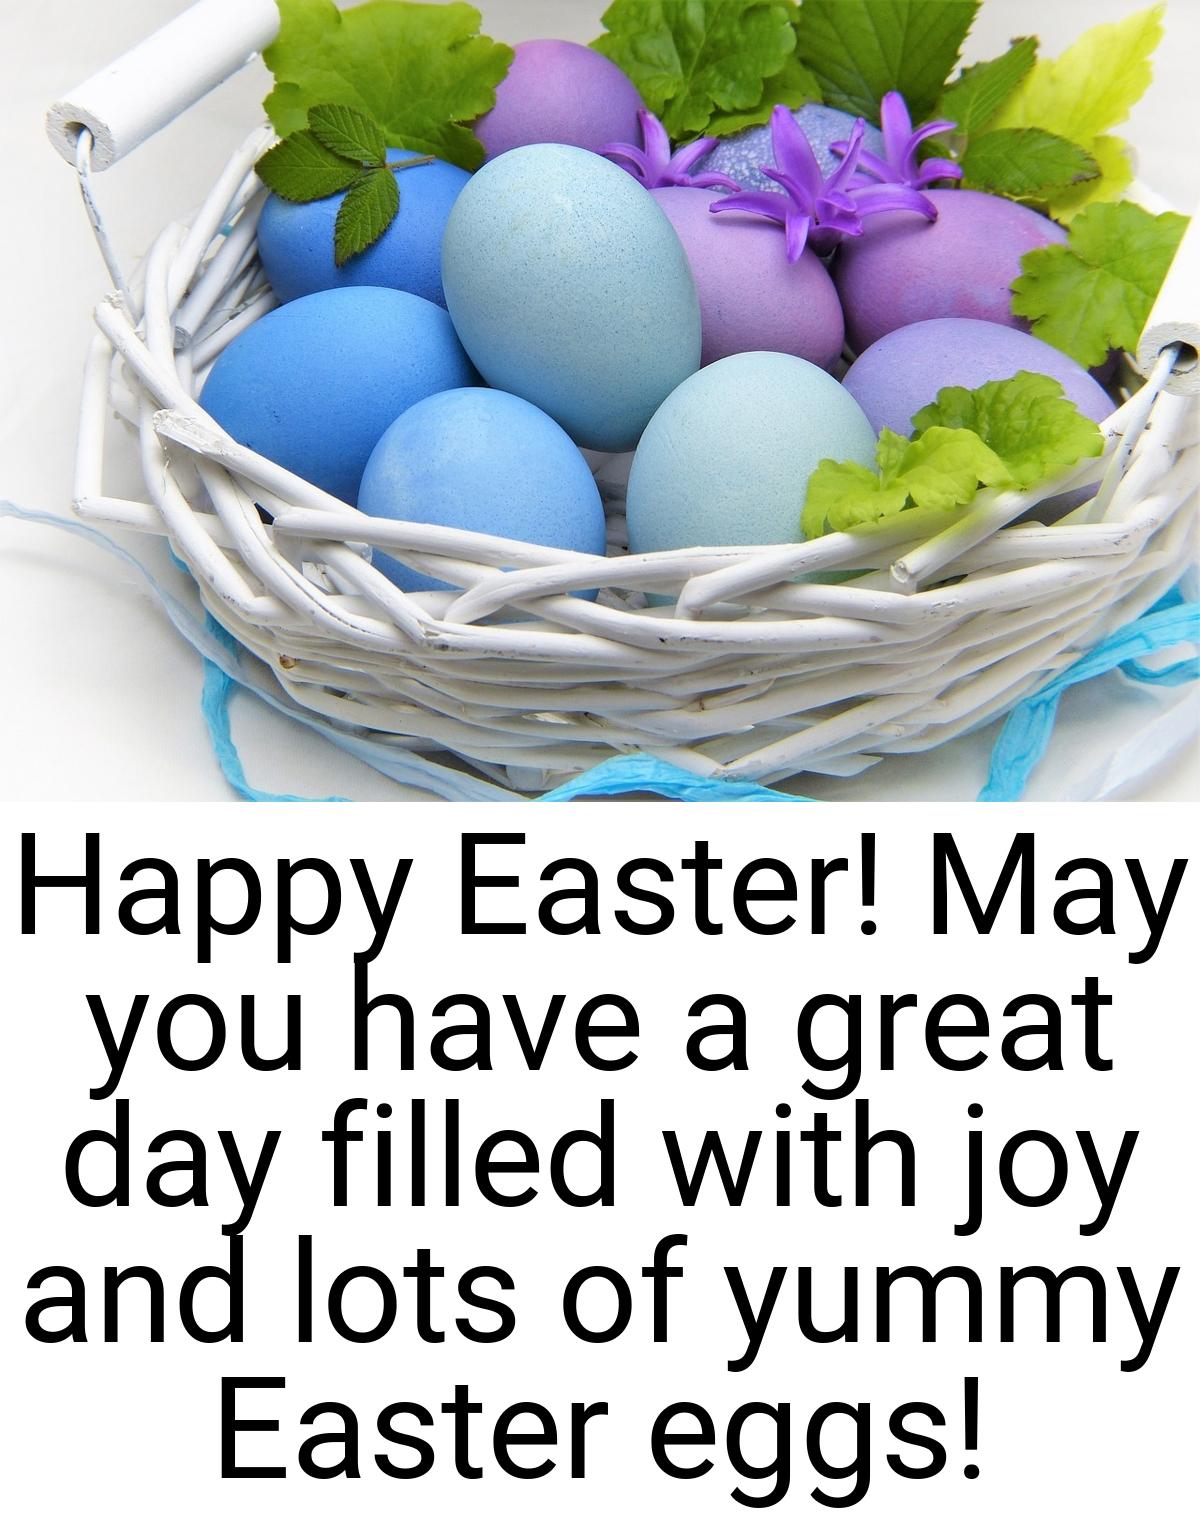 Happy Easter! May you have a great day filled with joy and